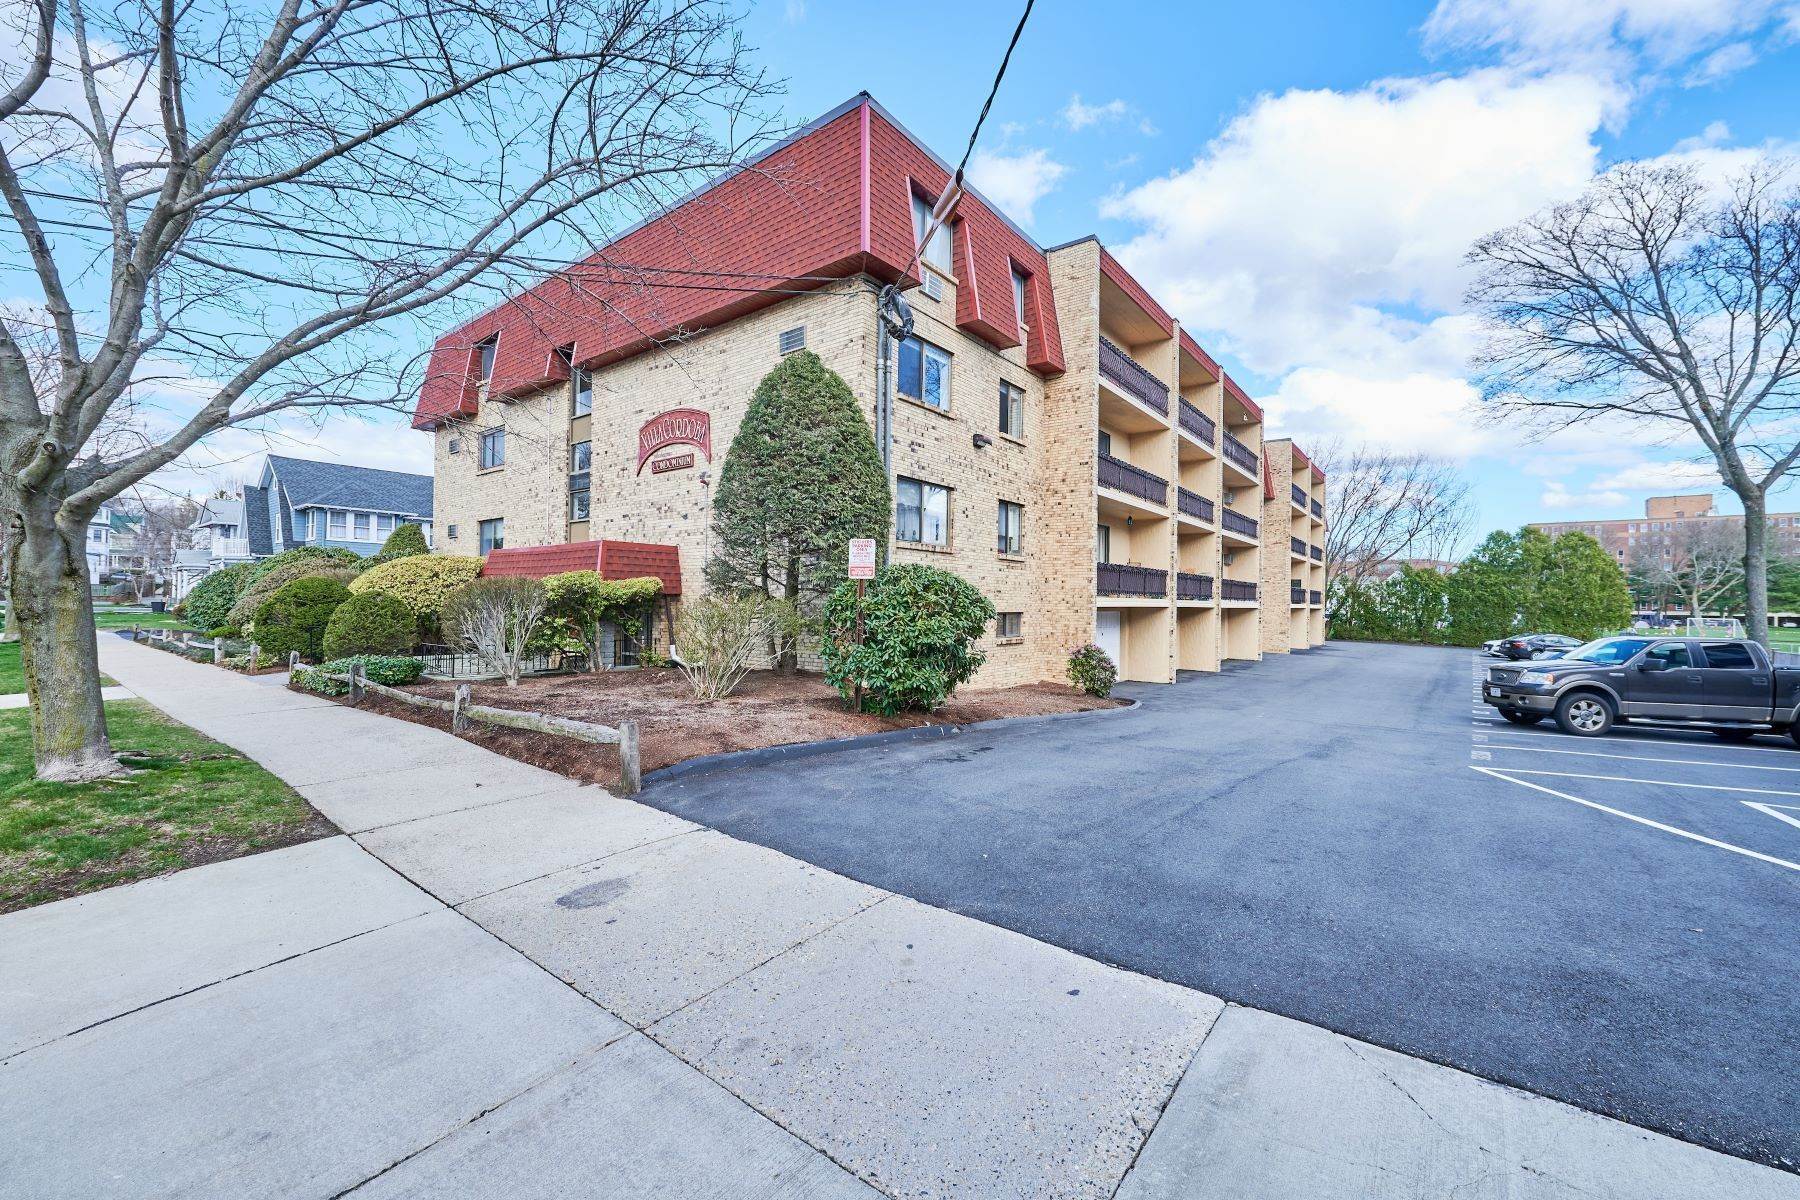 Property for Sale at 43 Albion Street, Unit A3 43 Albion St, A3, Melrose Highlands, Melrose, MA 02176